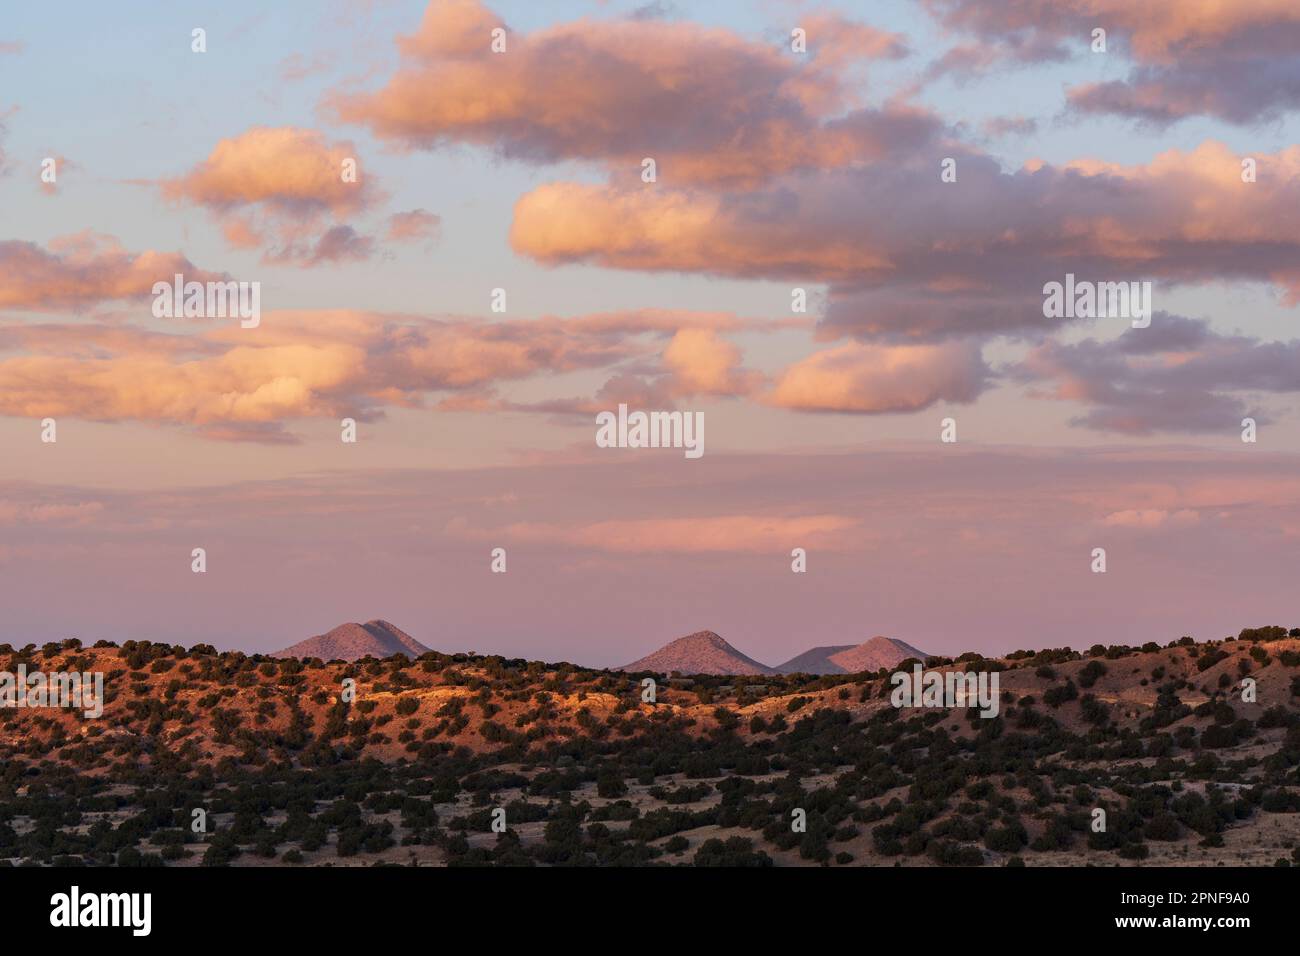 United States, New Mexico, Lamy, Colorful sky over Galisto Basin Preserve at sunset Stock Photo